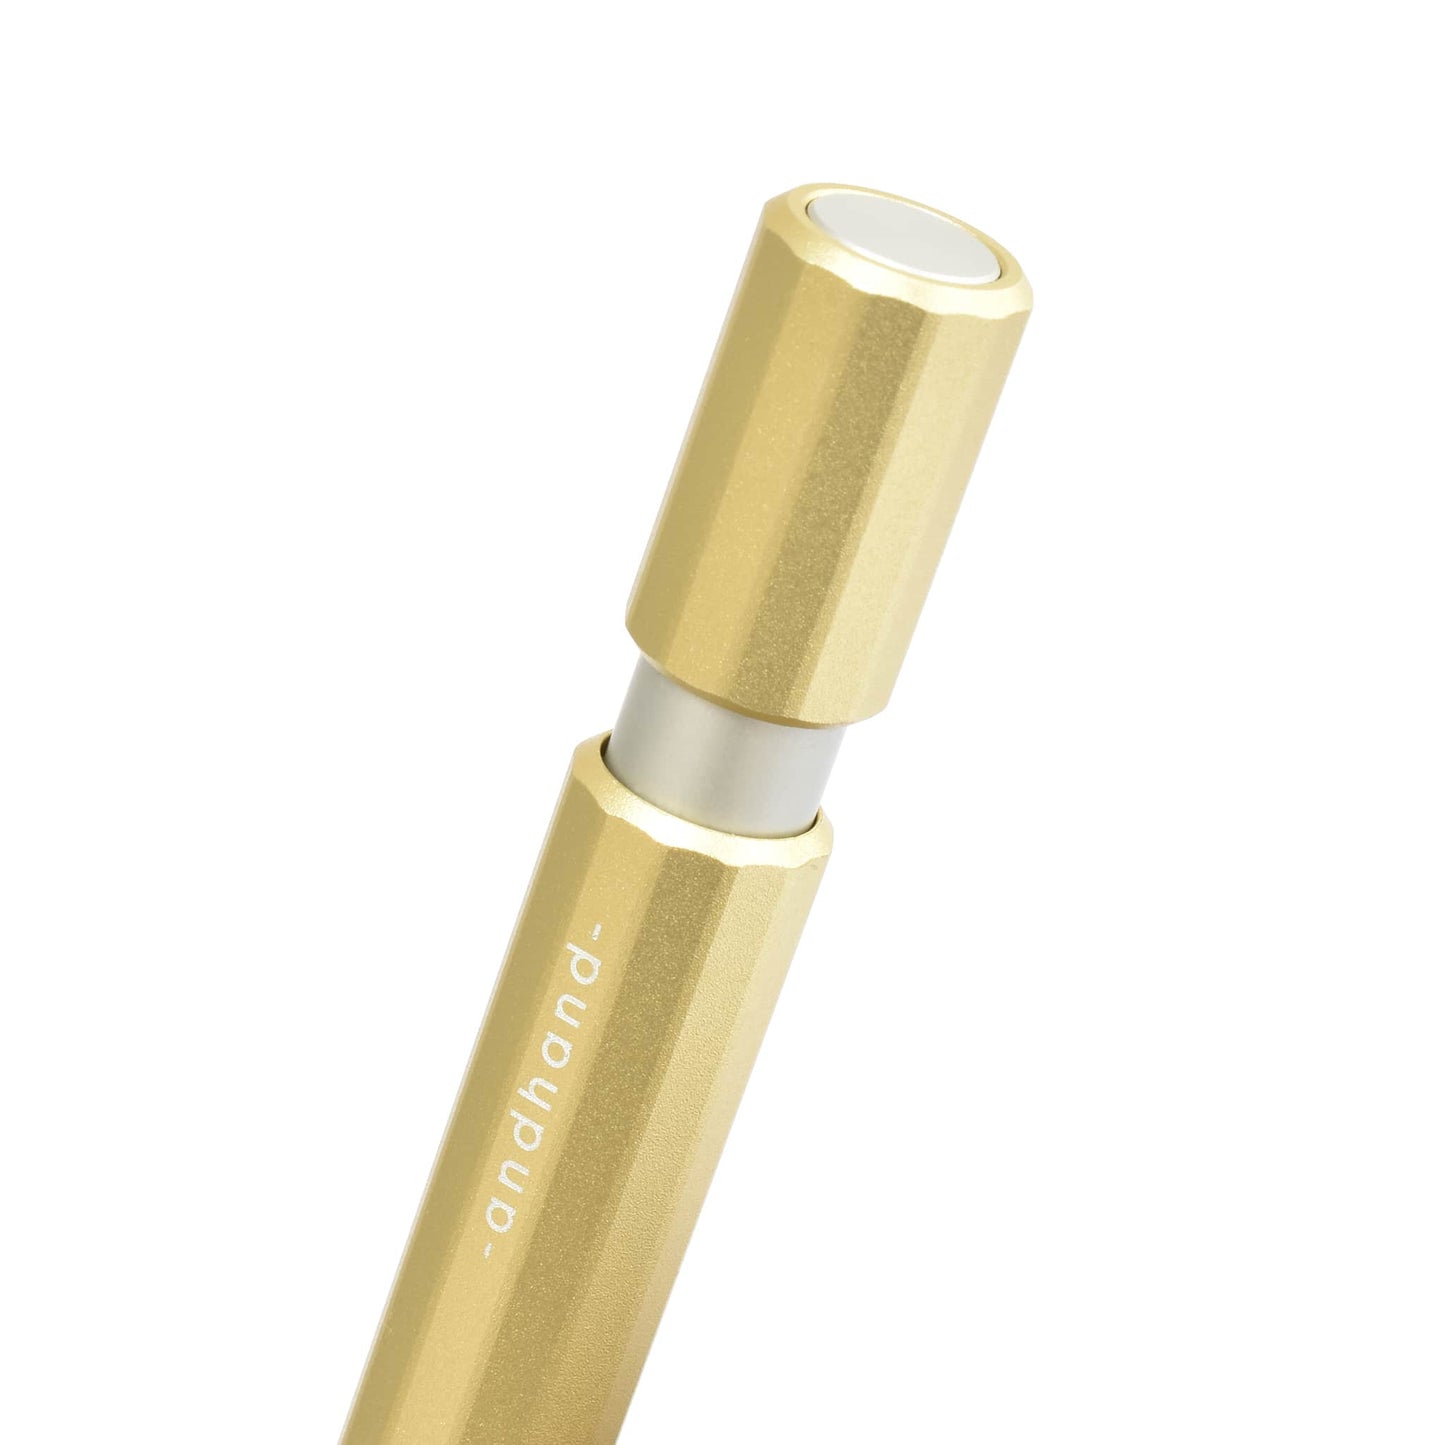 Aspect retractable pen in gold lustre anodized finish. A great pen for journaling, sketching or note taking. Equipped with a capless system rollerball cartridge for great ink flow.